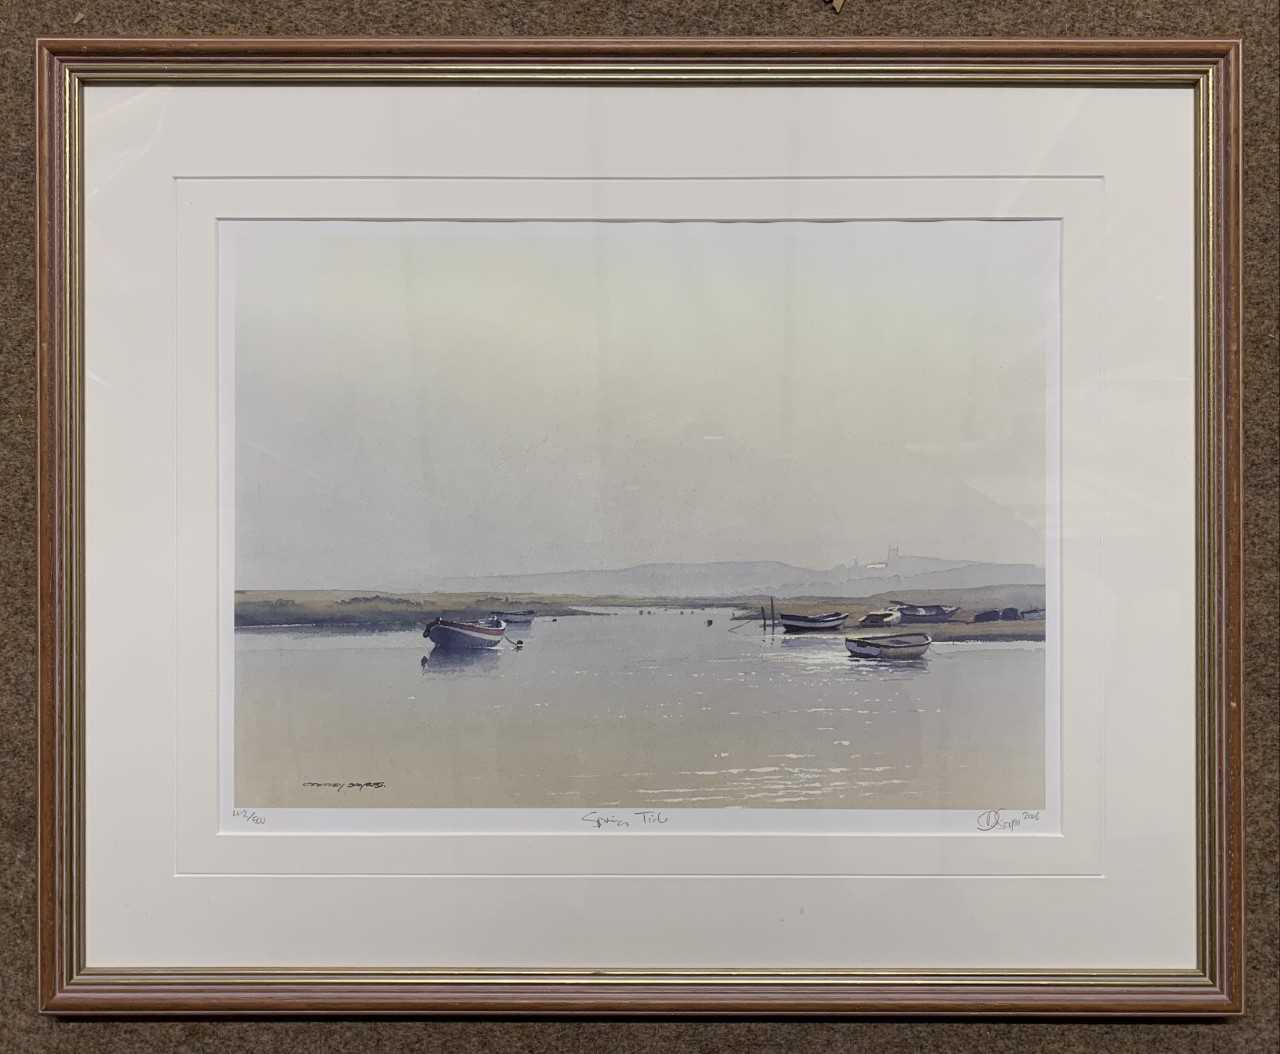 Godfrey Sayers (British, 20th century), "Spring Tide", limited edition lithograph, signed and